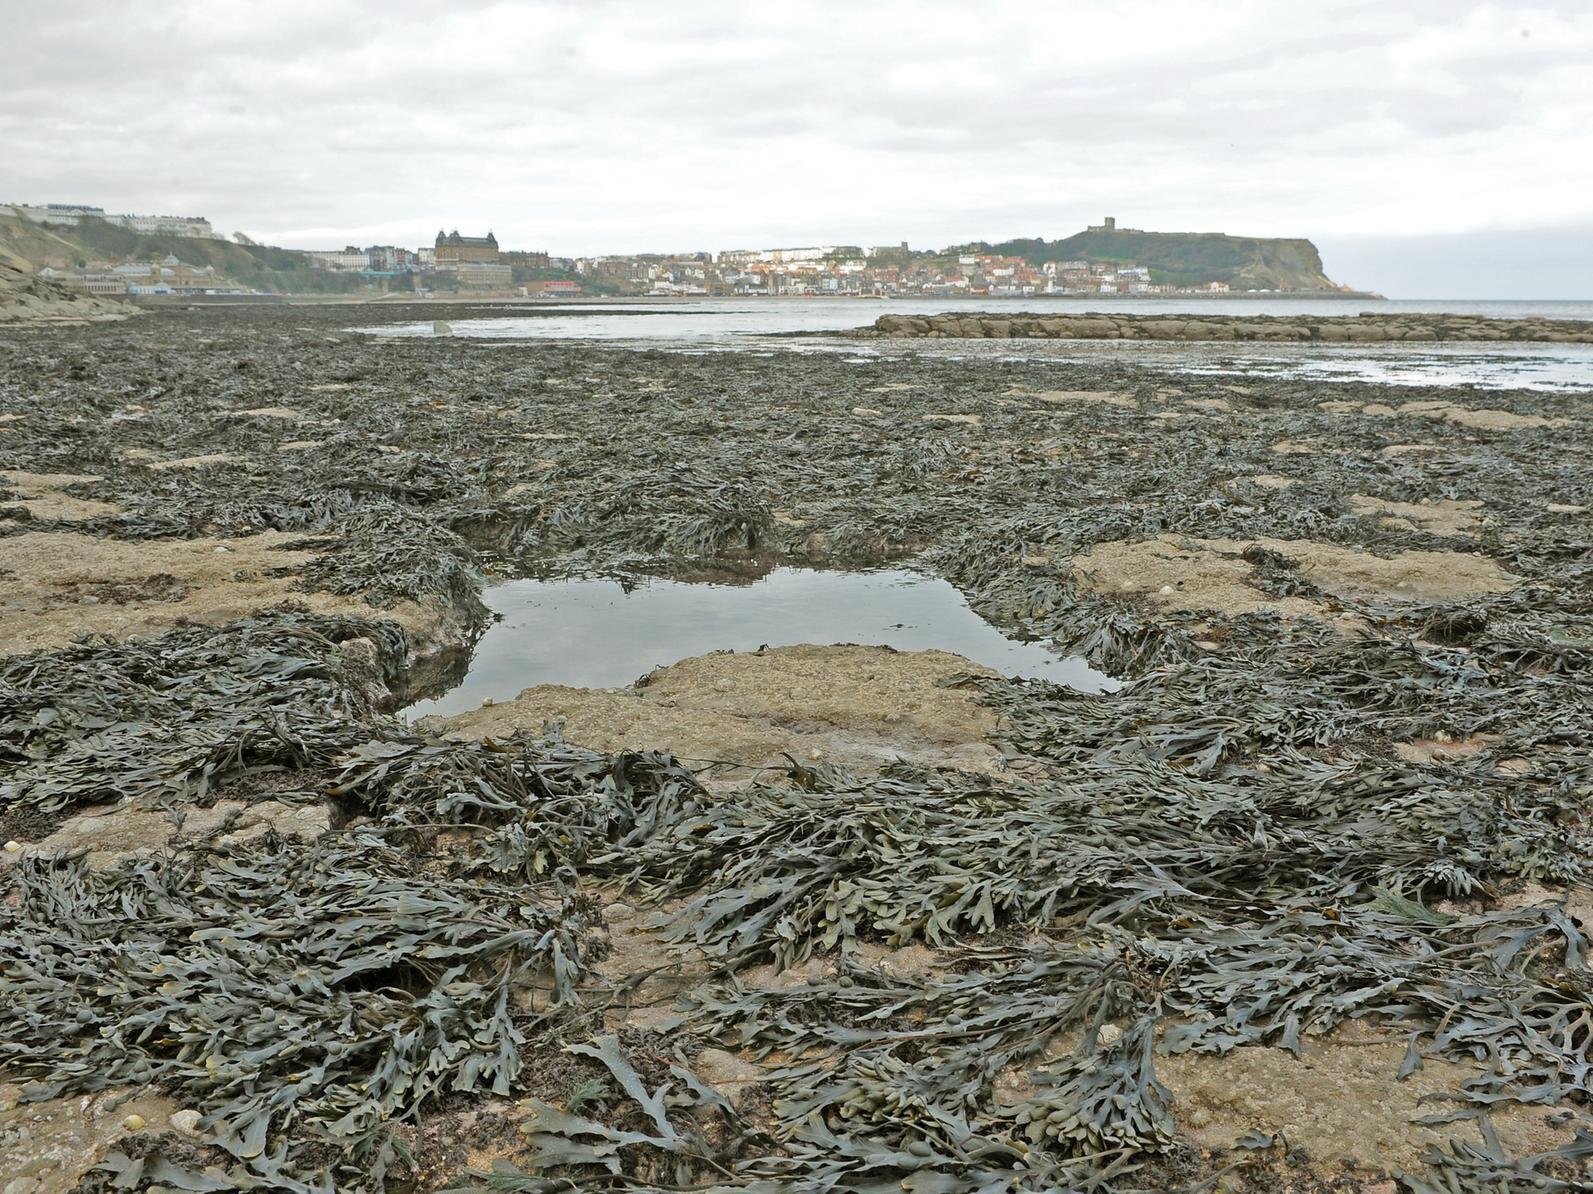 It is announced that England's first seaweed farm is to be created off Scarborough. The company, Seagrown, set up by a former fisherman and his wife, will create 25 jobs in the town.